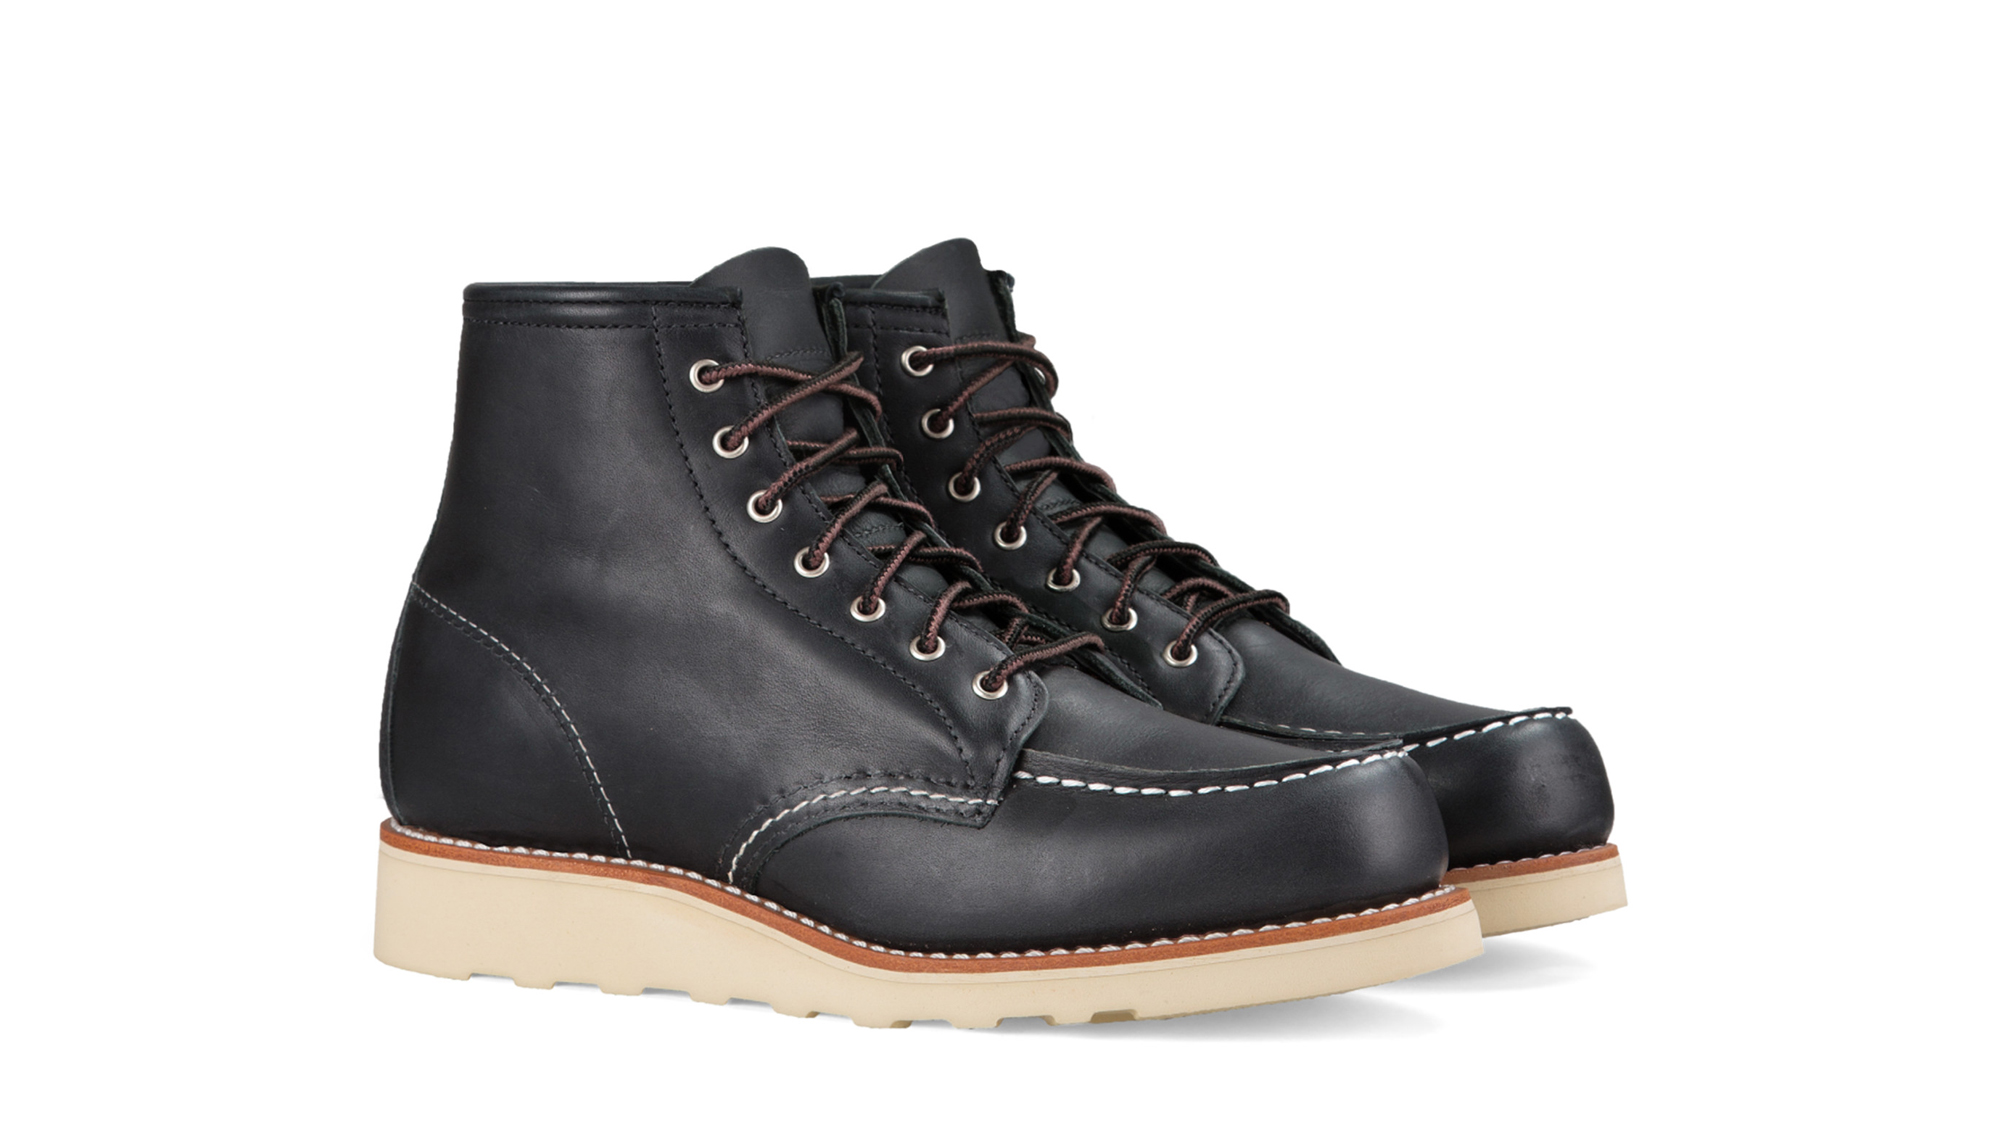 Moc Toe | Women's | Official Red Wing Shoes Online Store